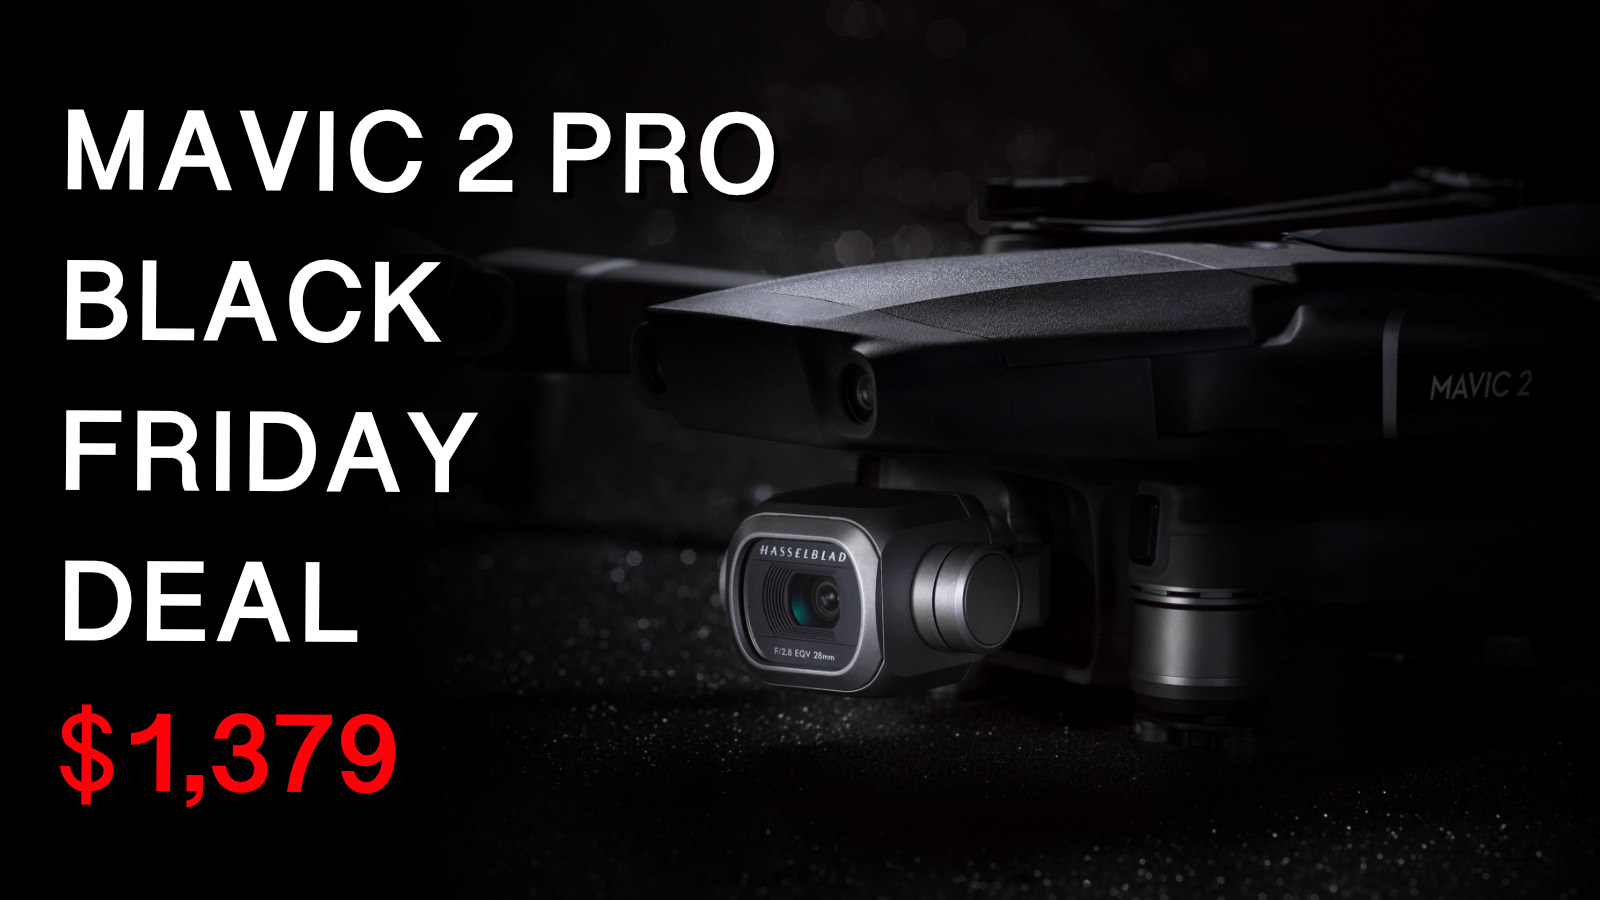 DJI Black Friday Deals and Holiday Promotions 2019 - Mavic 2 Pro for $1,379